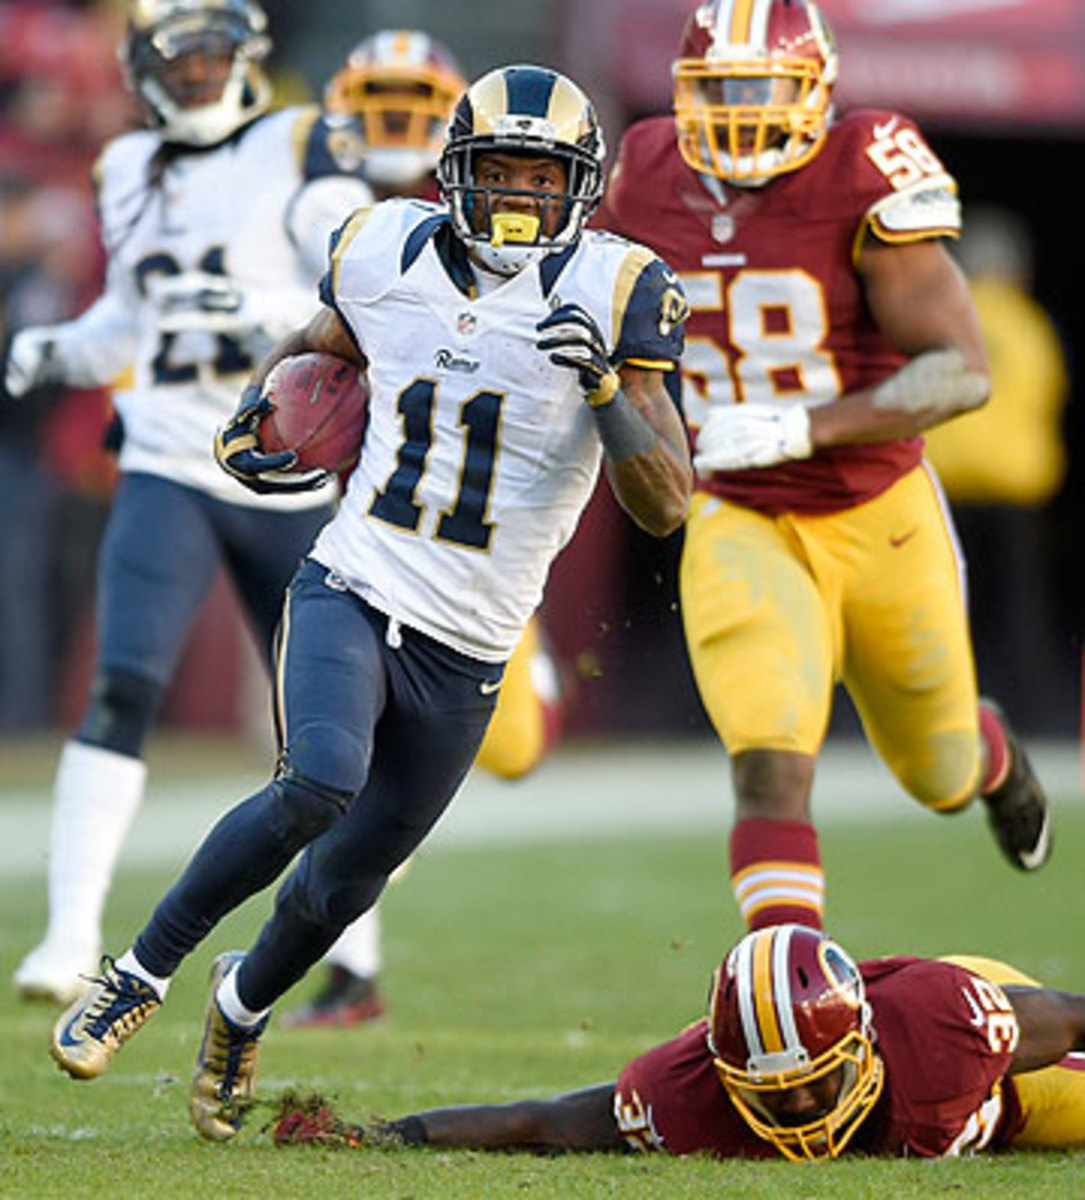 Tavon Austin had four punt returns for 143 yards, including this 78-yarder for a touchdown. (Nick Wass/AP)